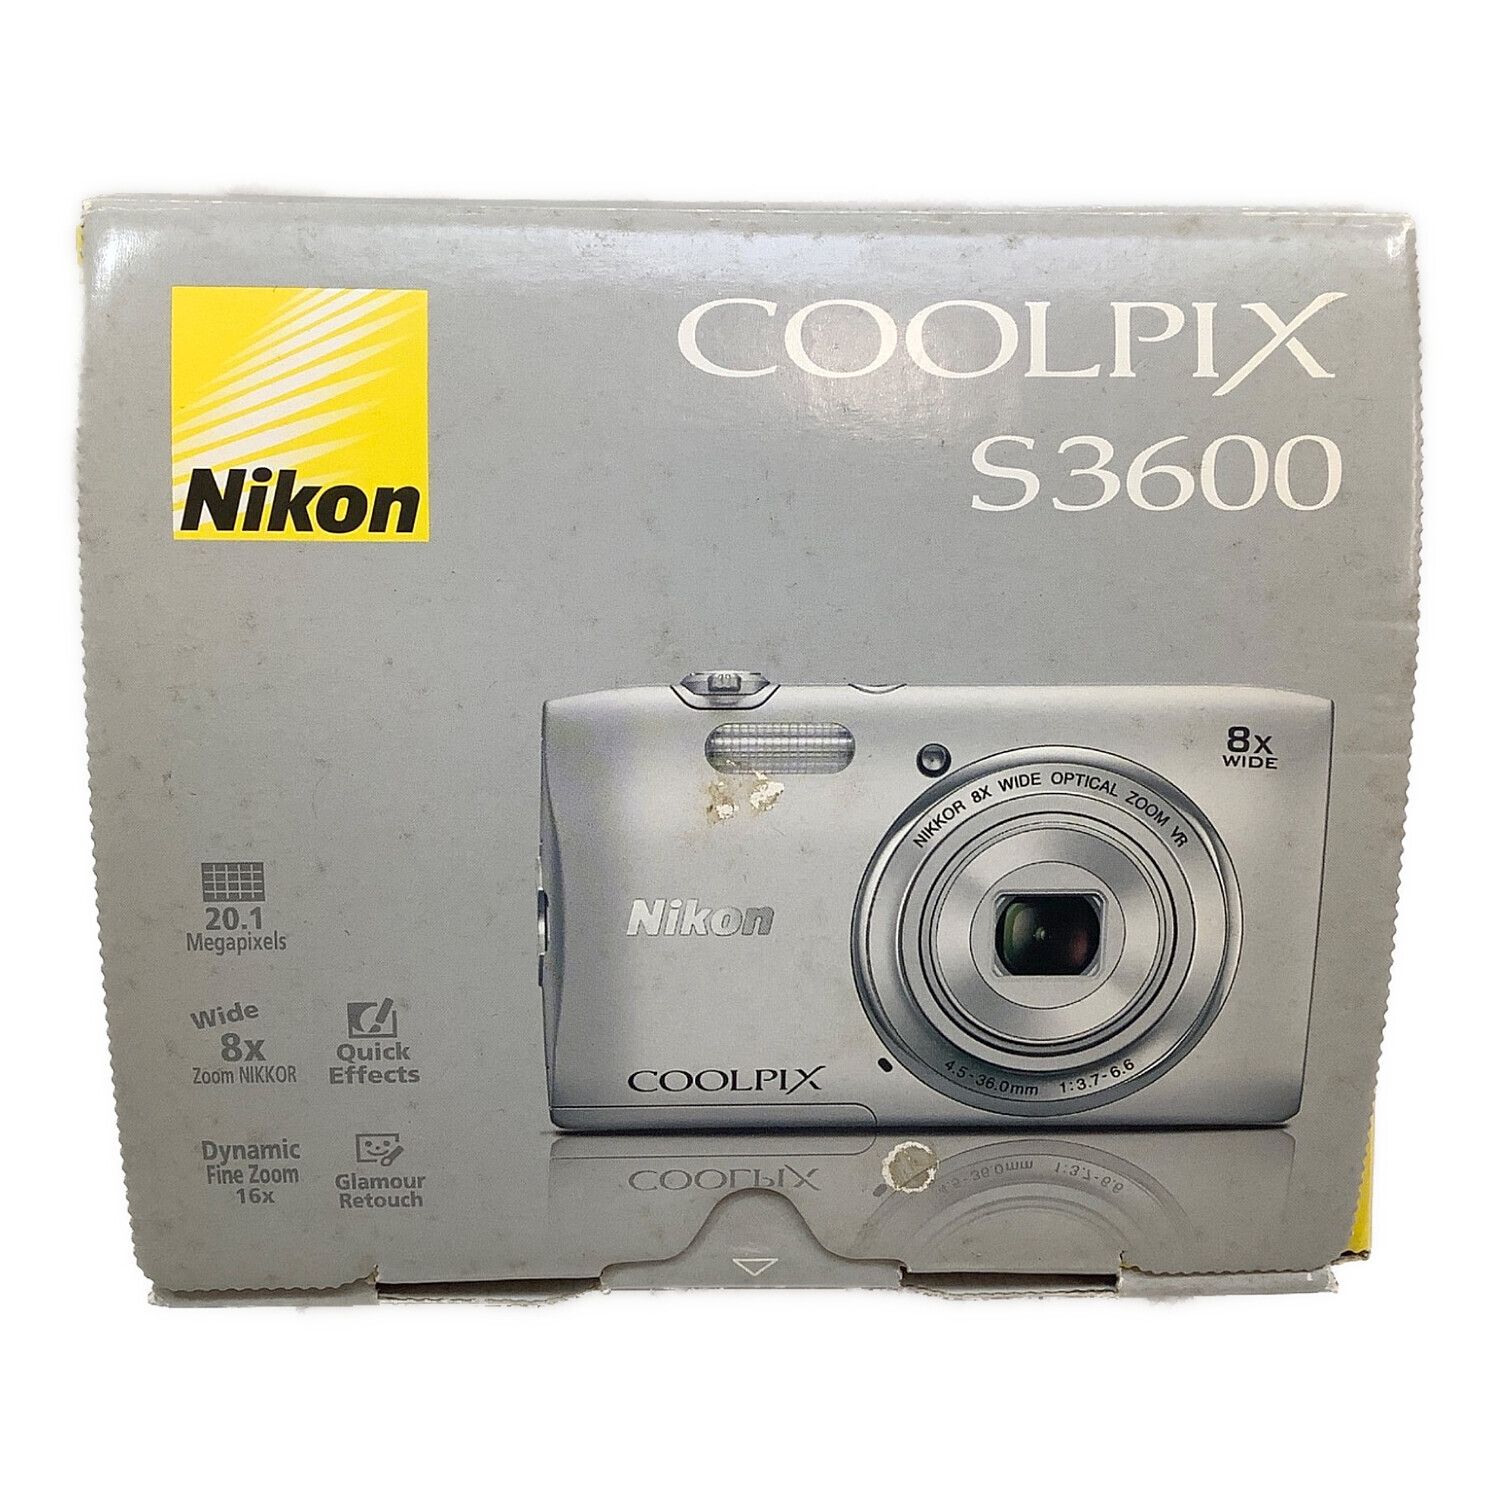 Nikon COOLPIX S3600 コンパクトデジカメ-